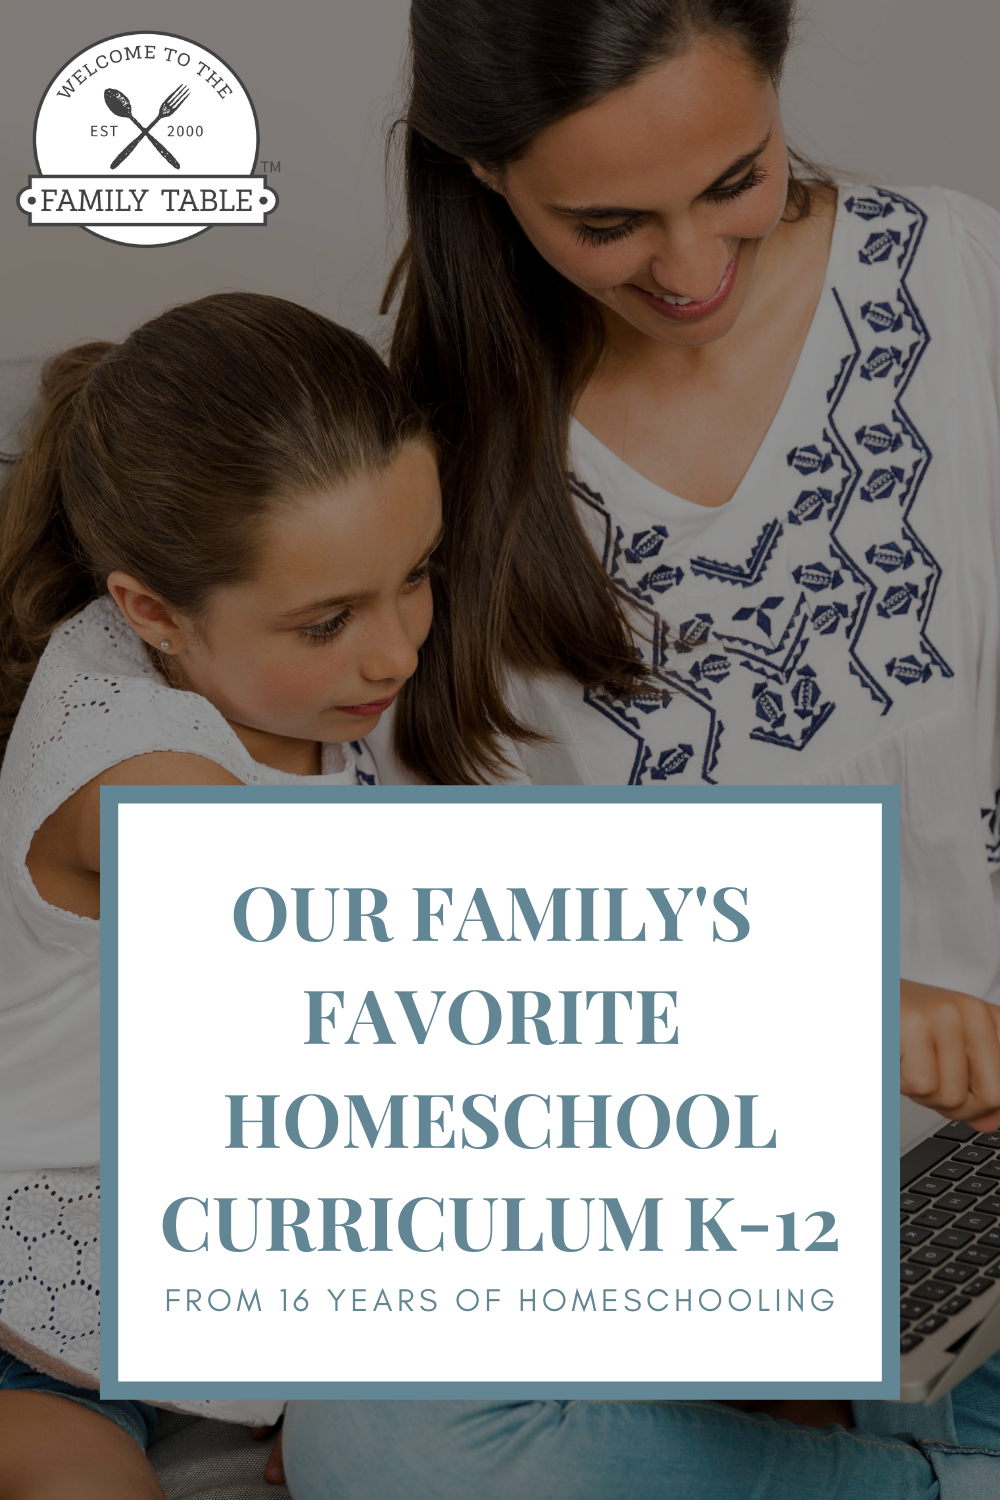 Our Family's Favorite Homeschool Curriculum